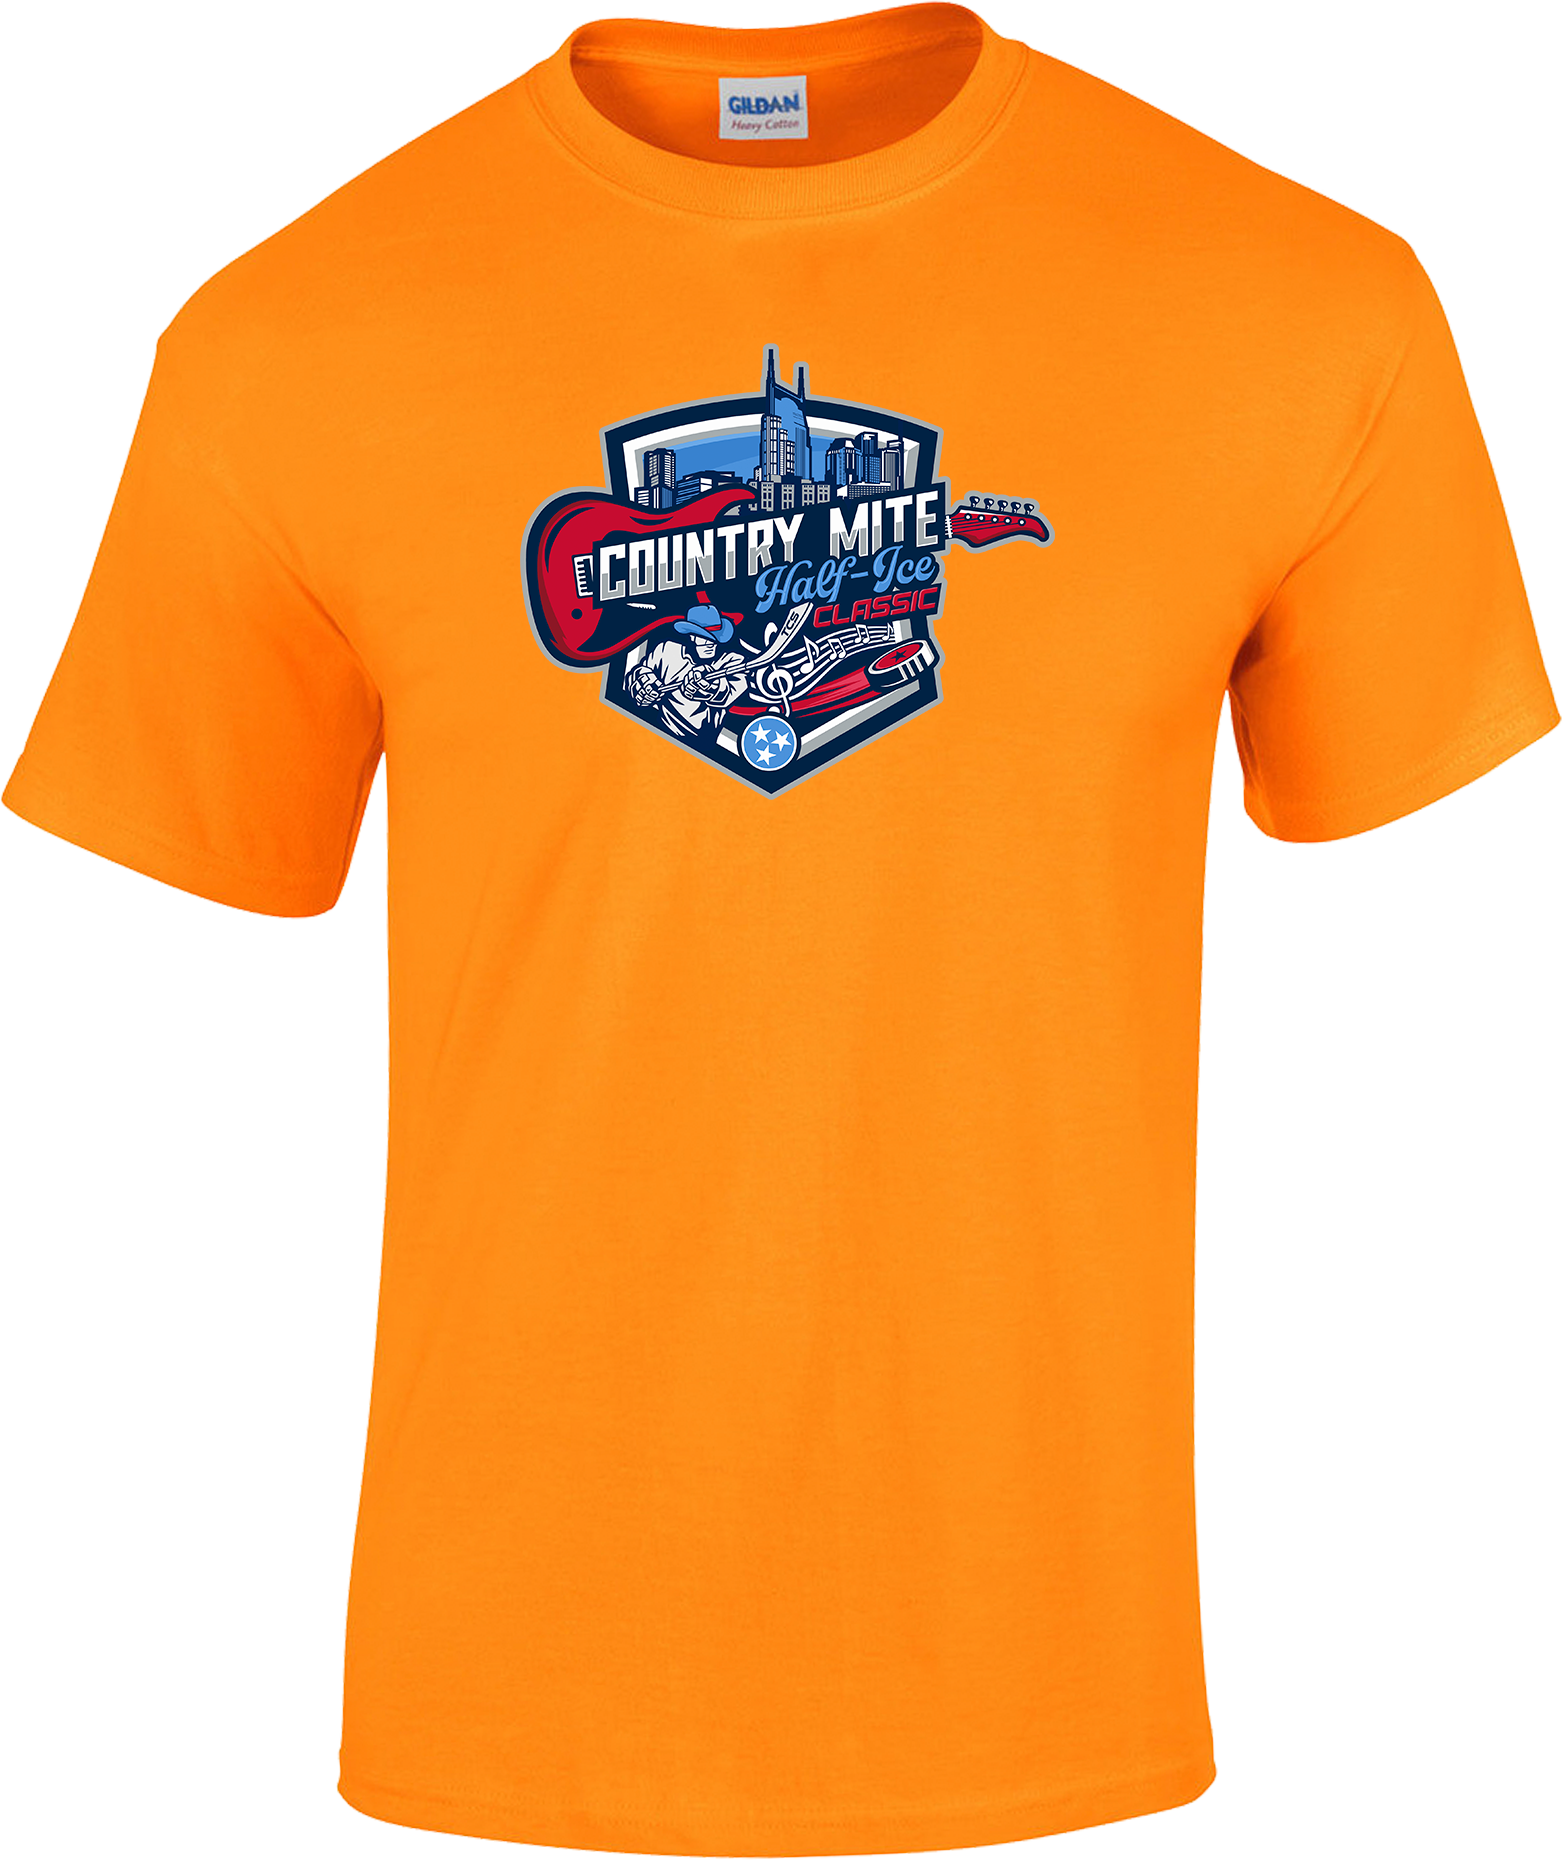 SHORT SLEEVES - 2023 Country Mite Half-Ice Classic